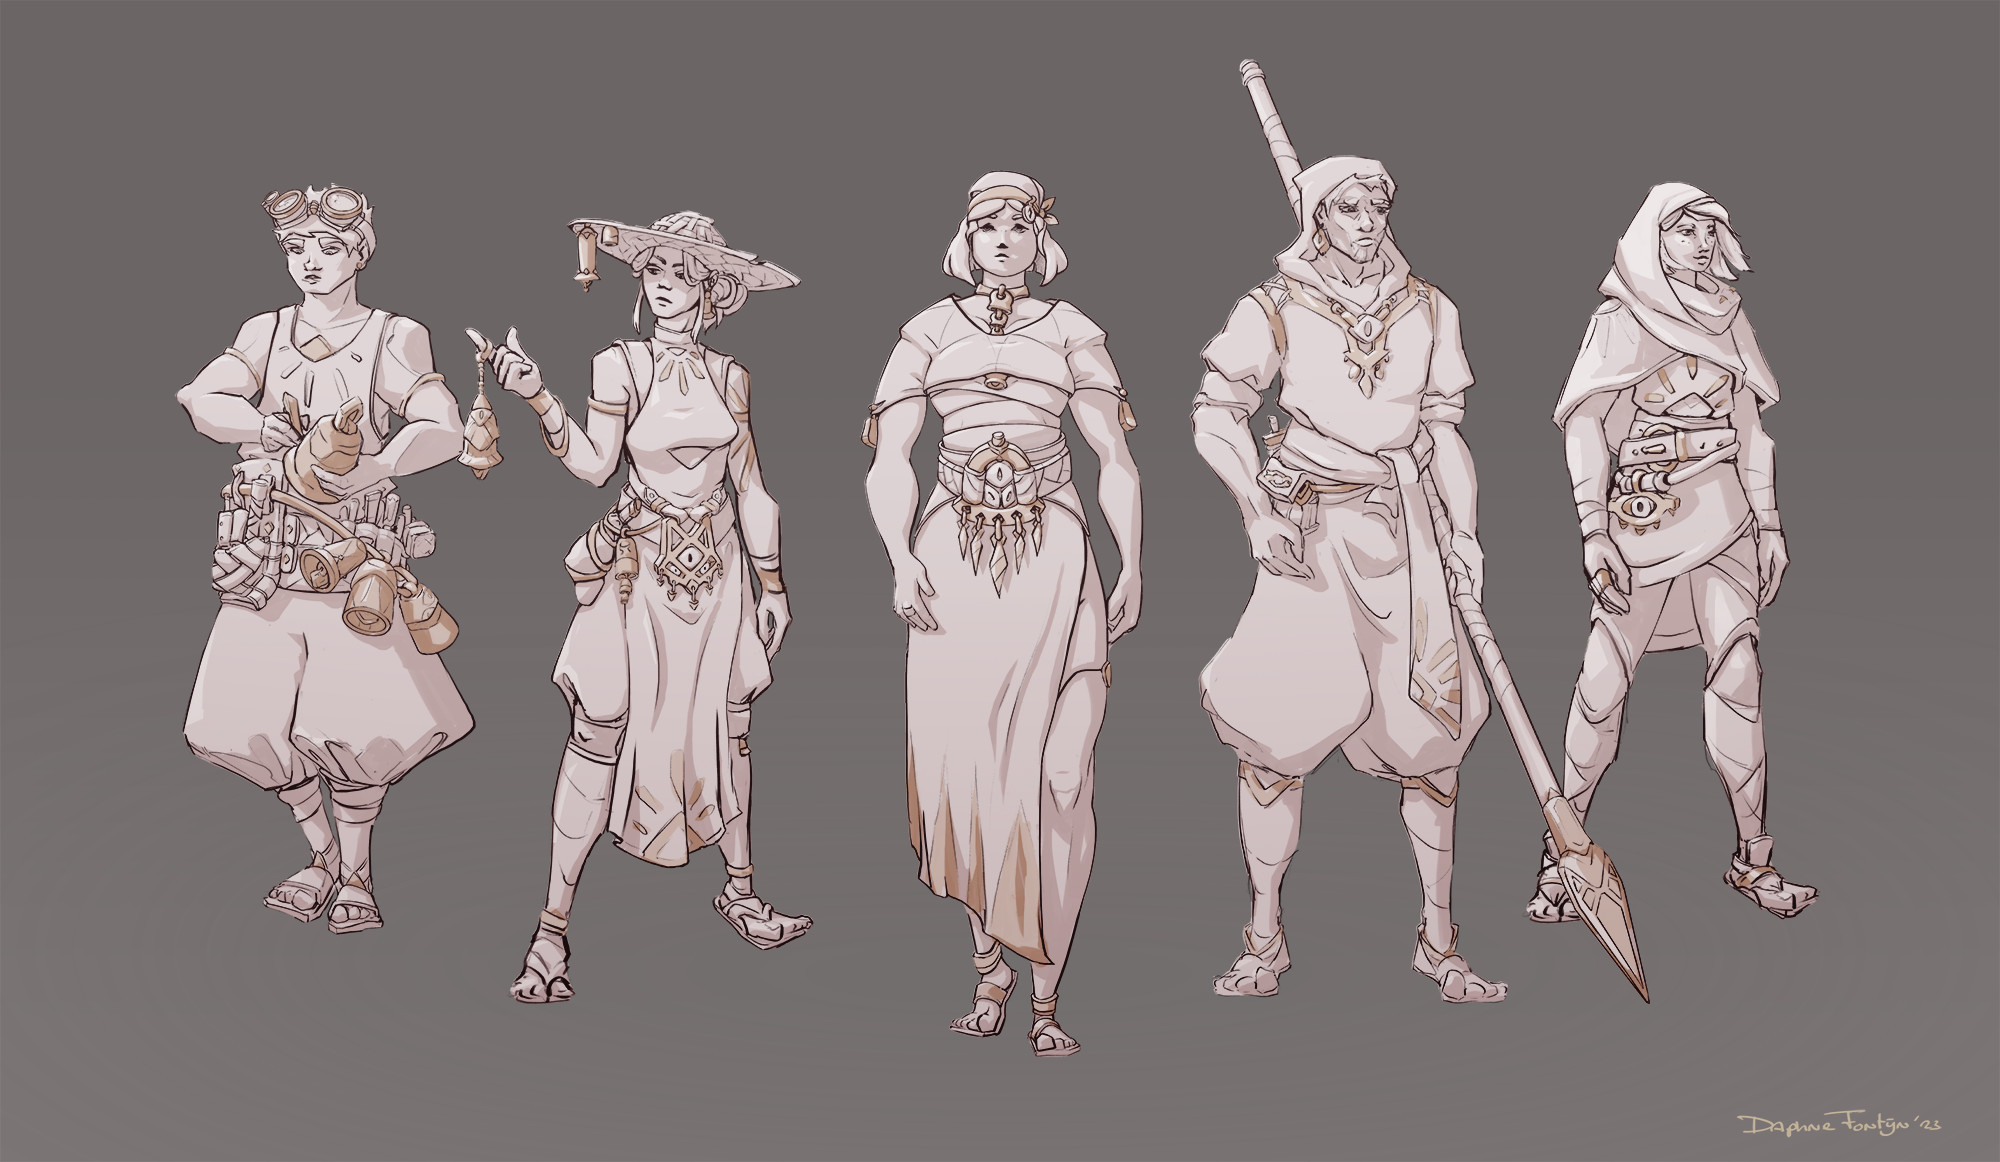 I was thinking that these are the NPC's you can hire for your desert expeditions. We've got an artificer, shaman, team manager, fighter and scout